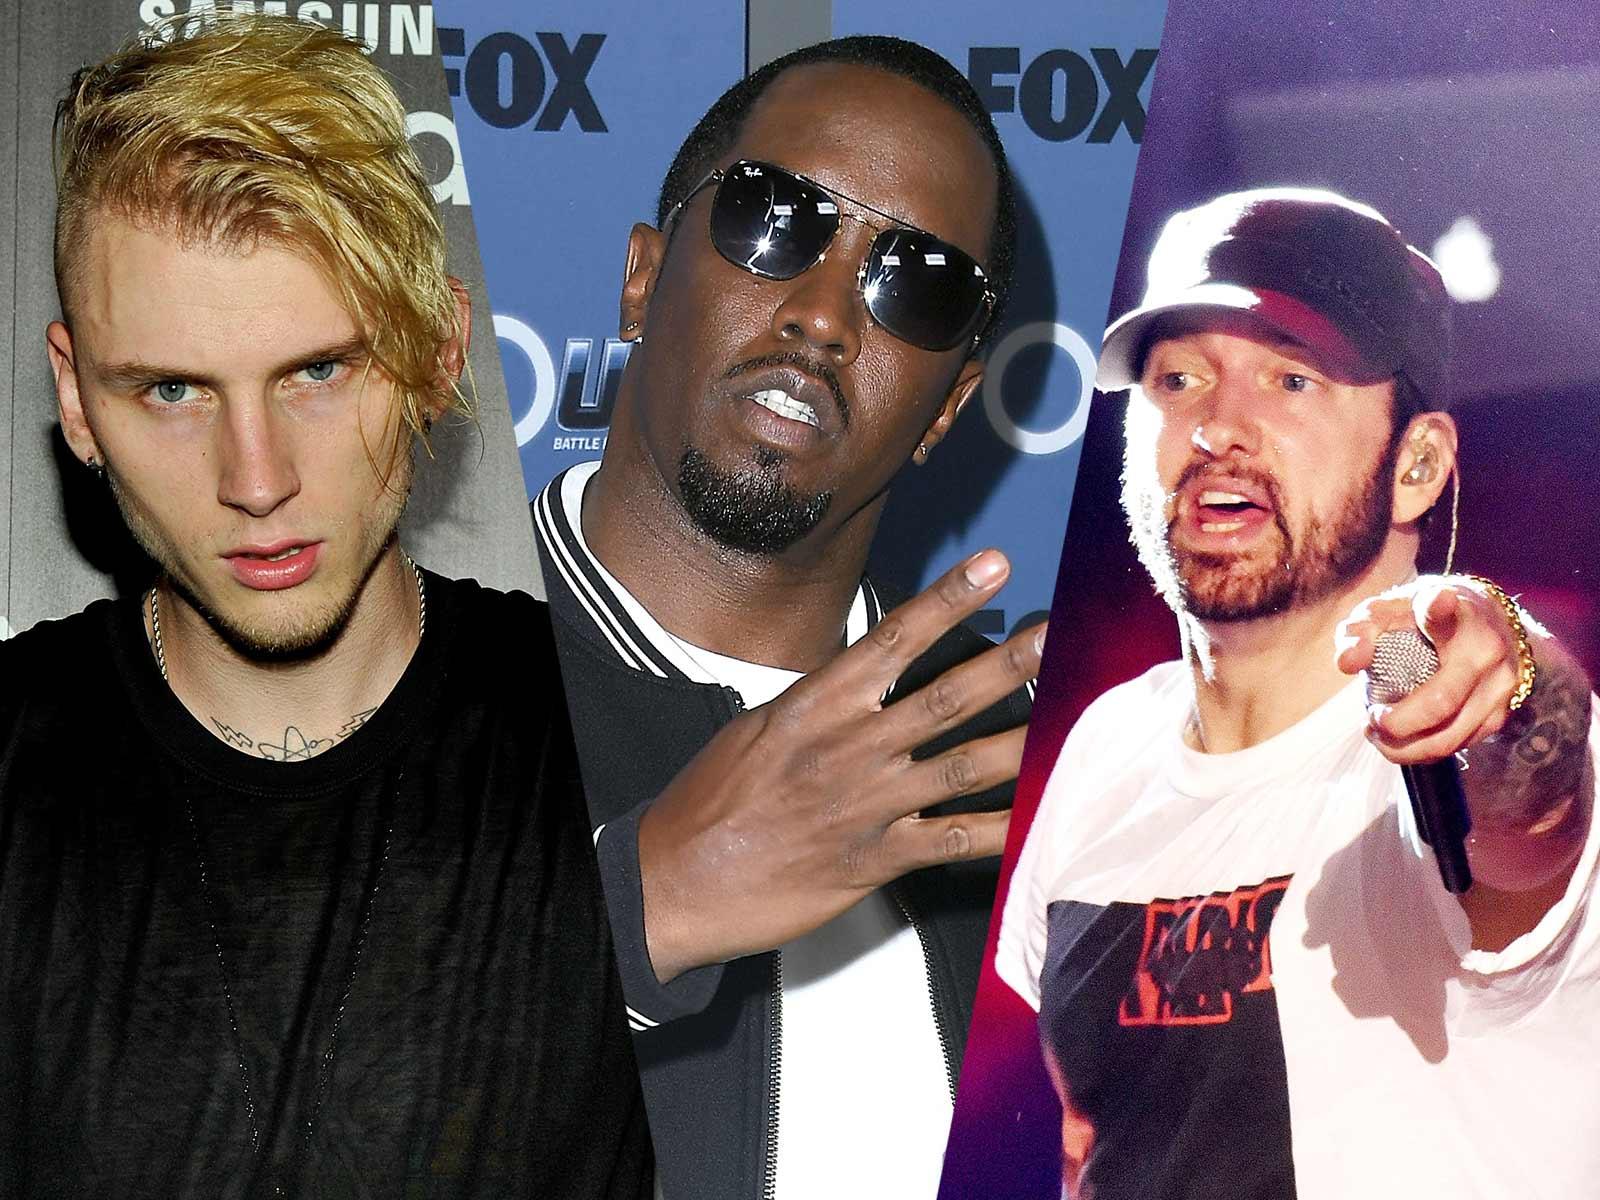 Machine Gun Kelly Drops Eminem Diss Track, Claims Diddy Asked Him to Apologize for a Tweet